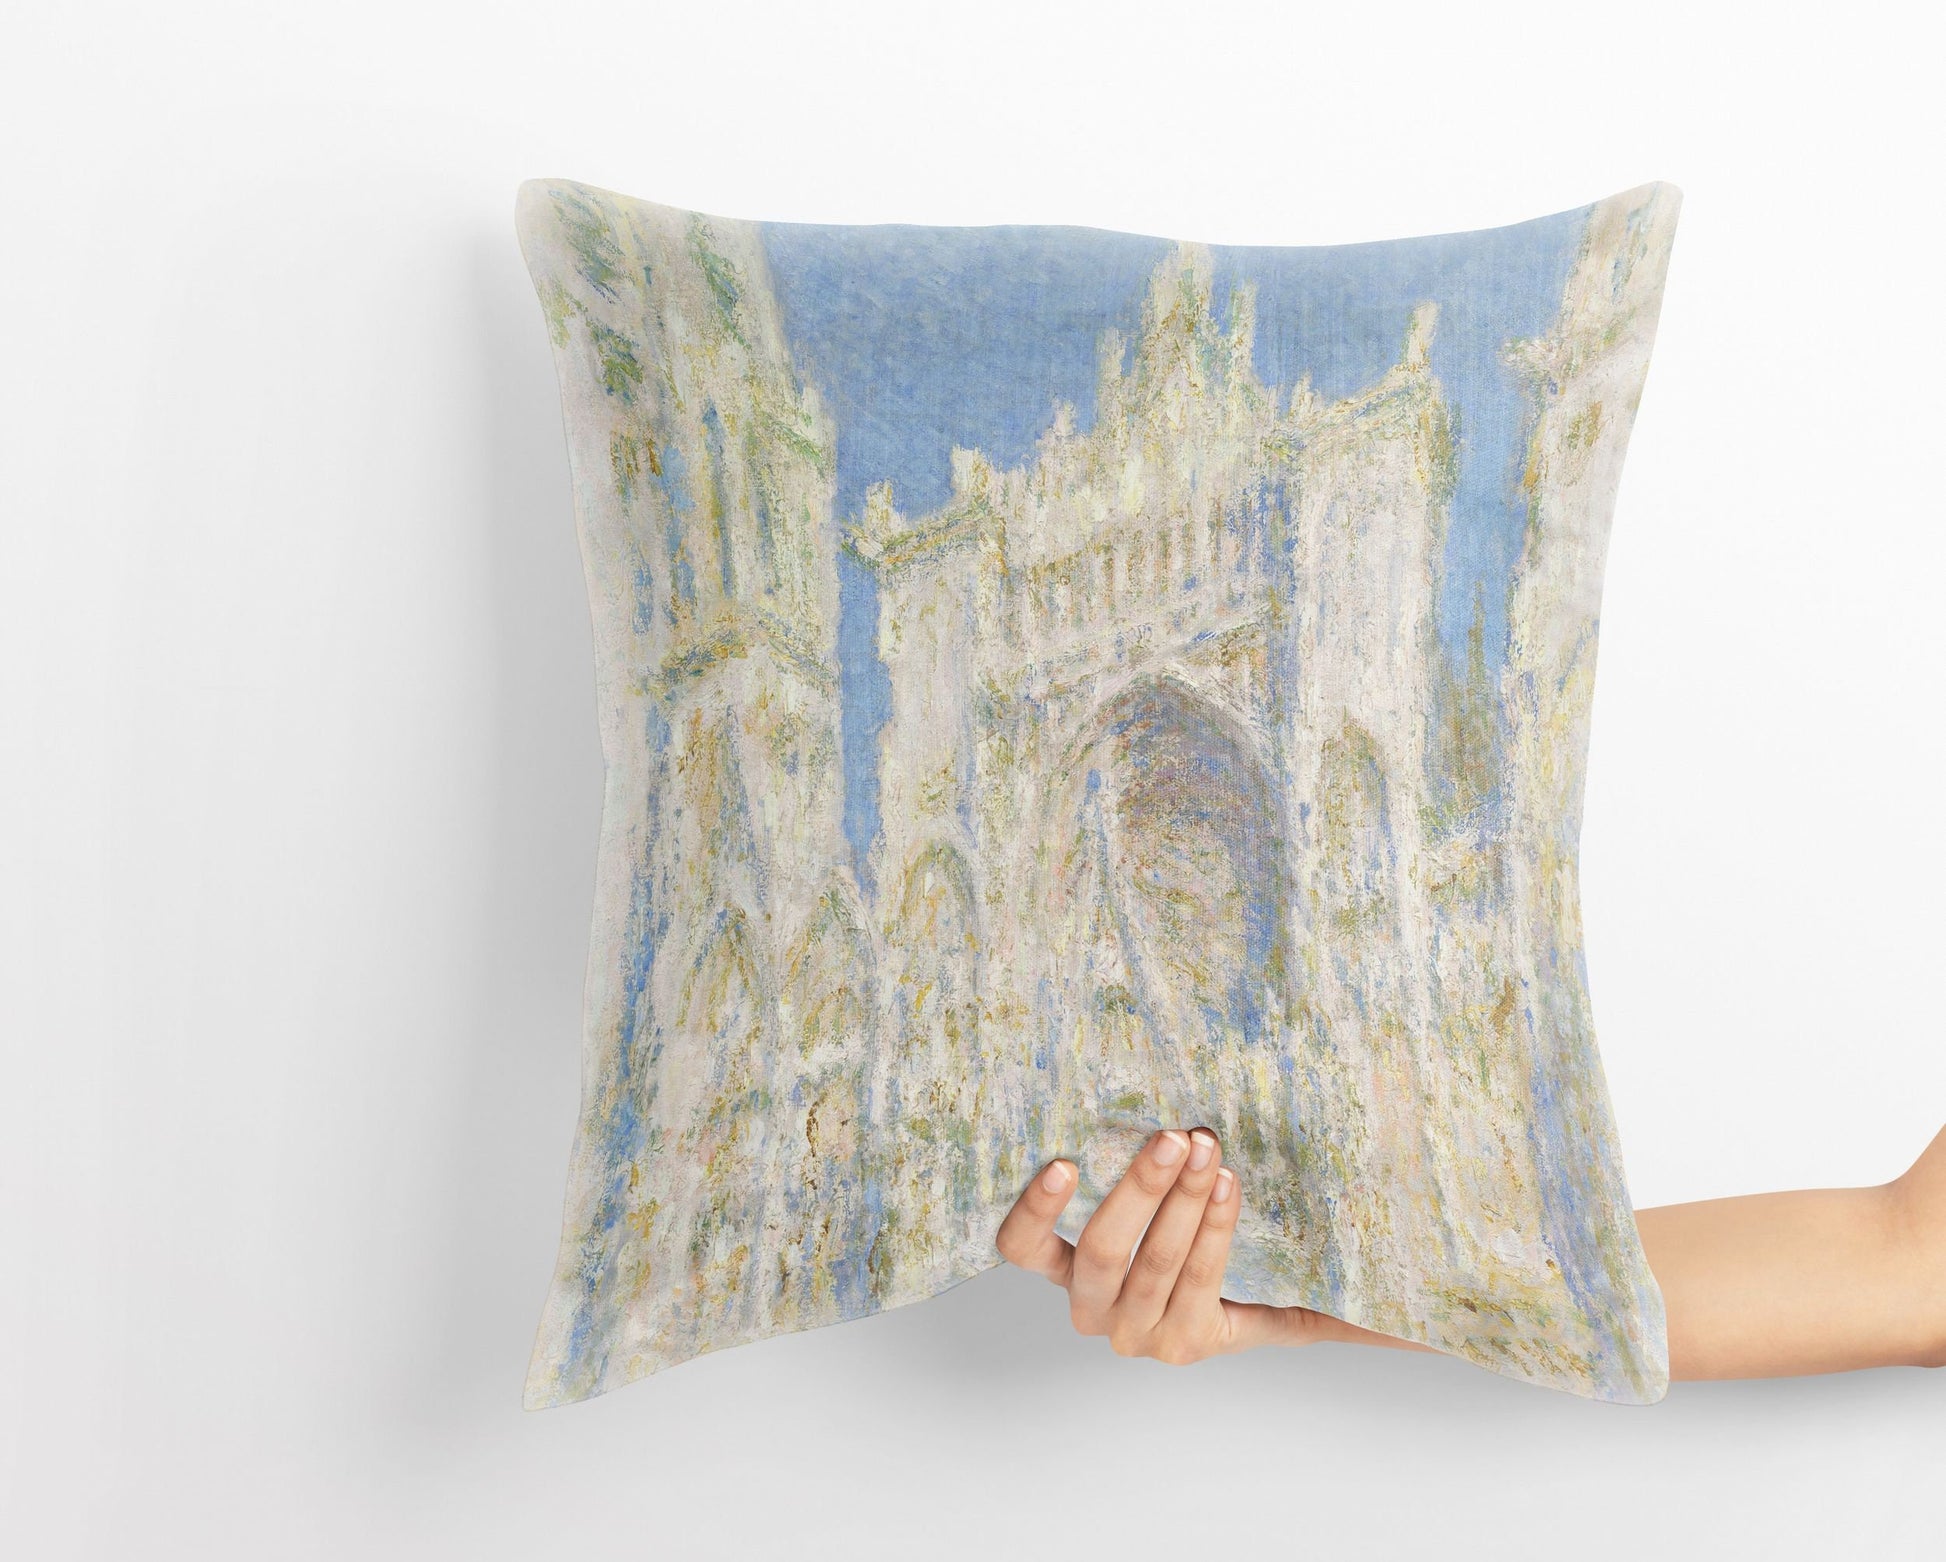 Claude Monet Famous Painting Rouen Cathedral, Throw Pillow, Abstract Throw Pillow, Designer Pillow, Housewarming Gift, Holiday Gift